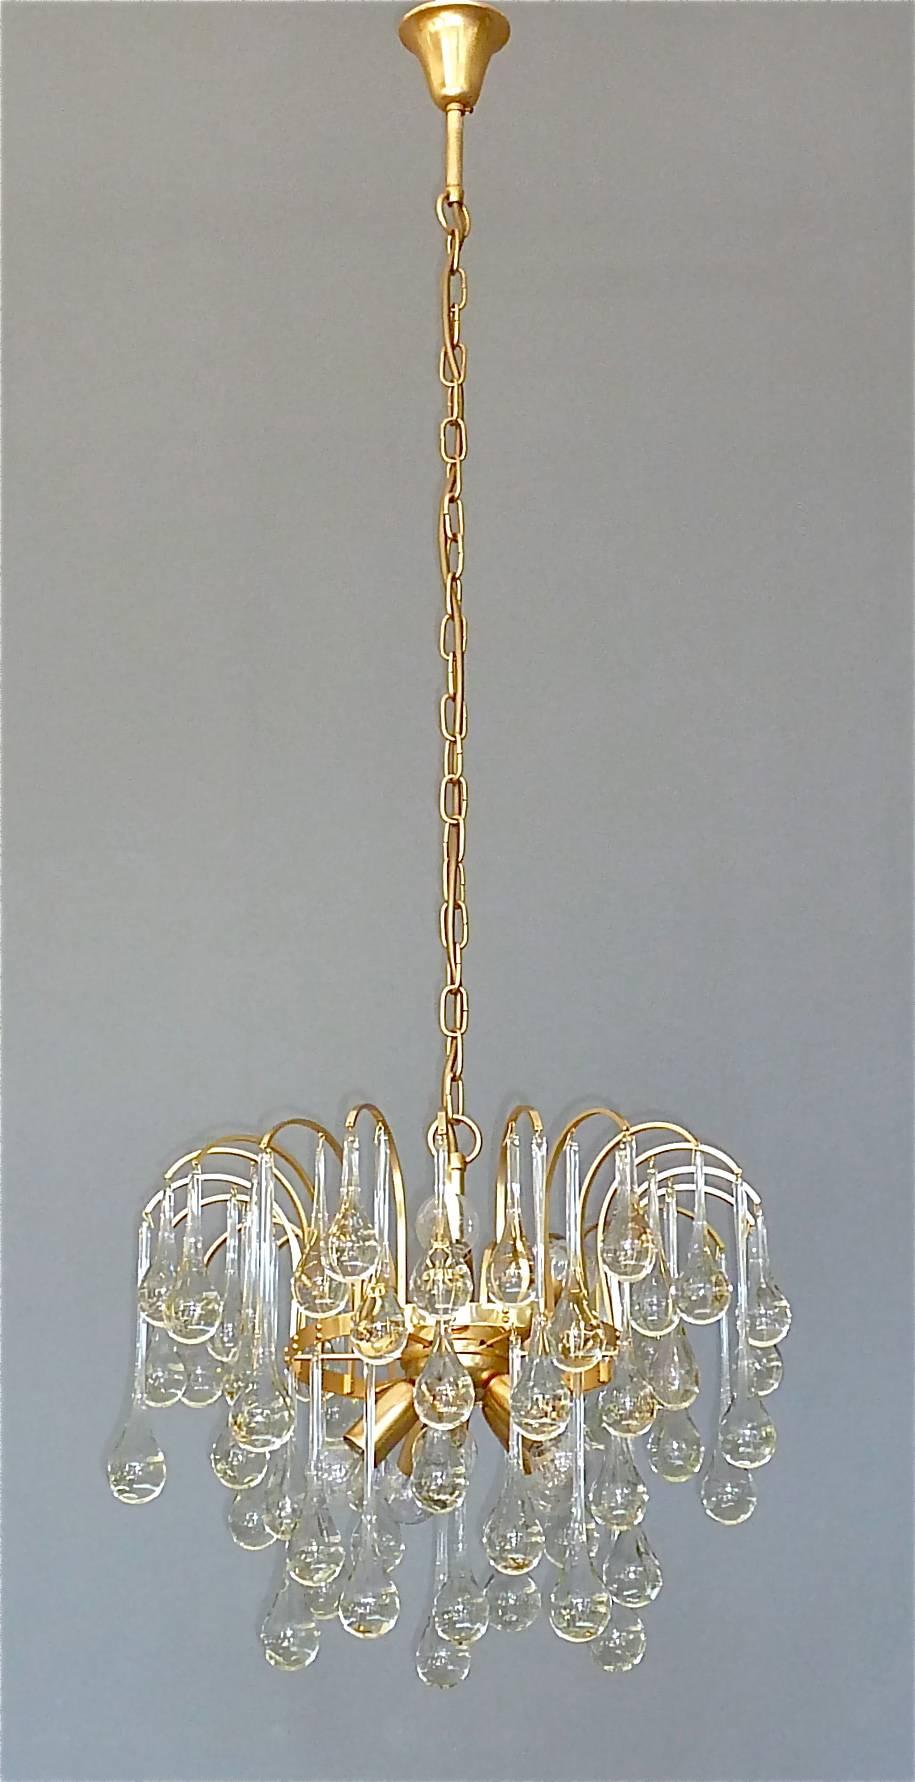 Impressive large gilt brass and elongated Murano glass drops Sputnik chandelier made by Christoph Palme, Germany, circa 1960-1970. The chain-hanging length-adjustable chandelier has a gilt brass metal Sputnik construction with beautifully arranged